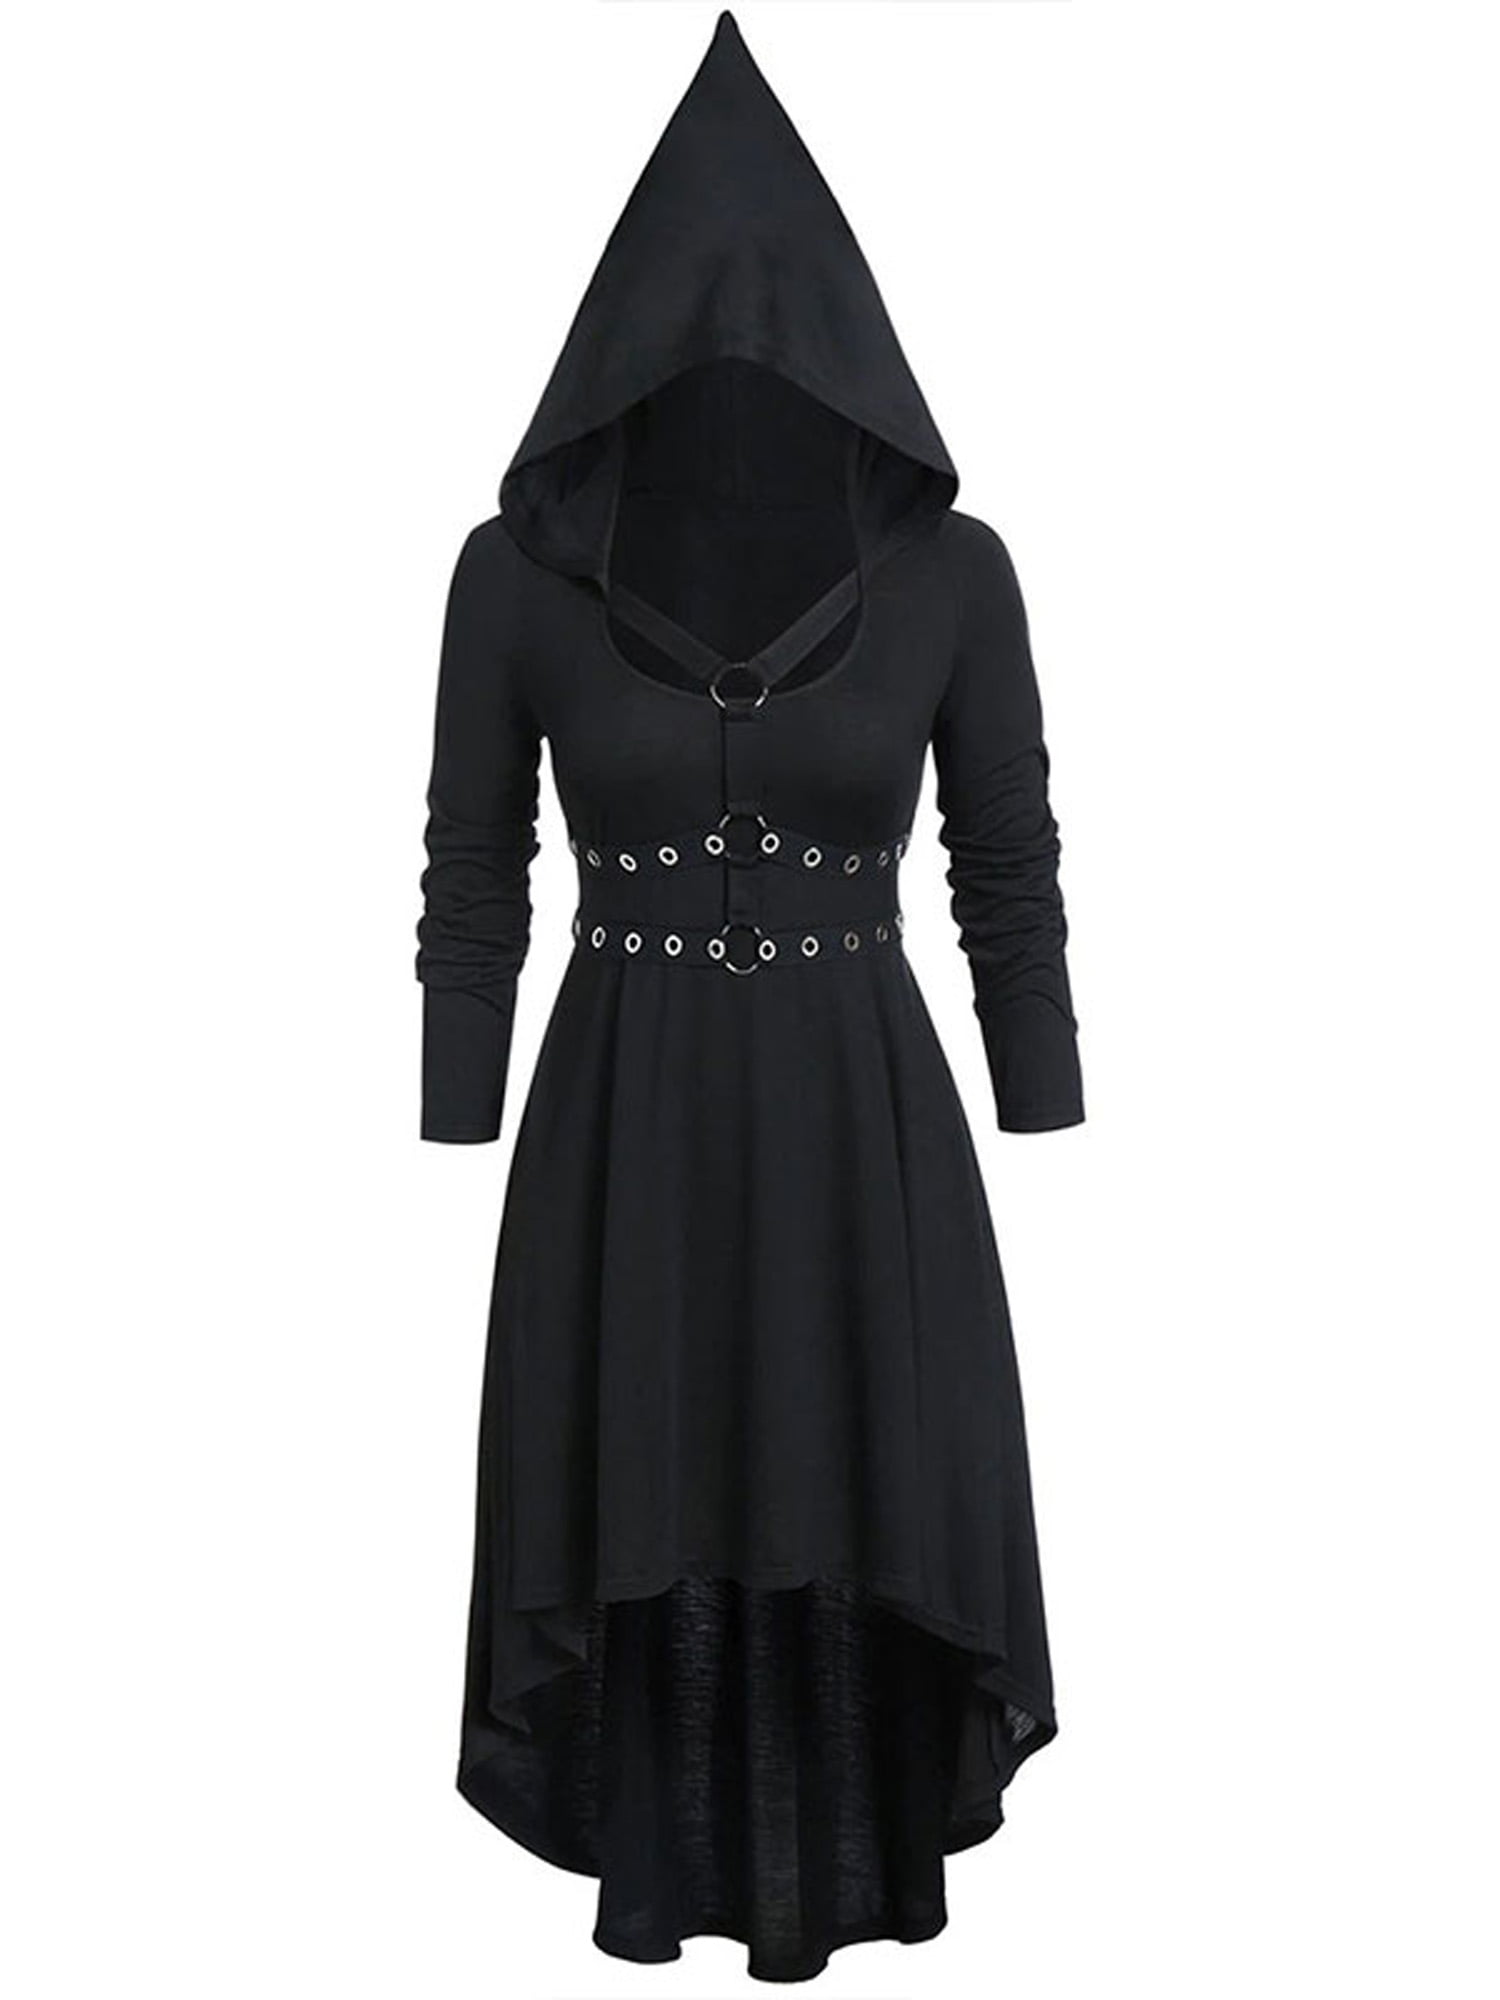 Buy Womens Vintage Gothic Long Sleeve Hooded Party Evening Medieval ...